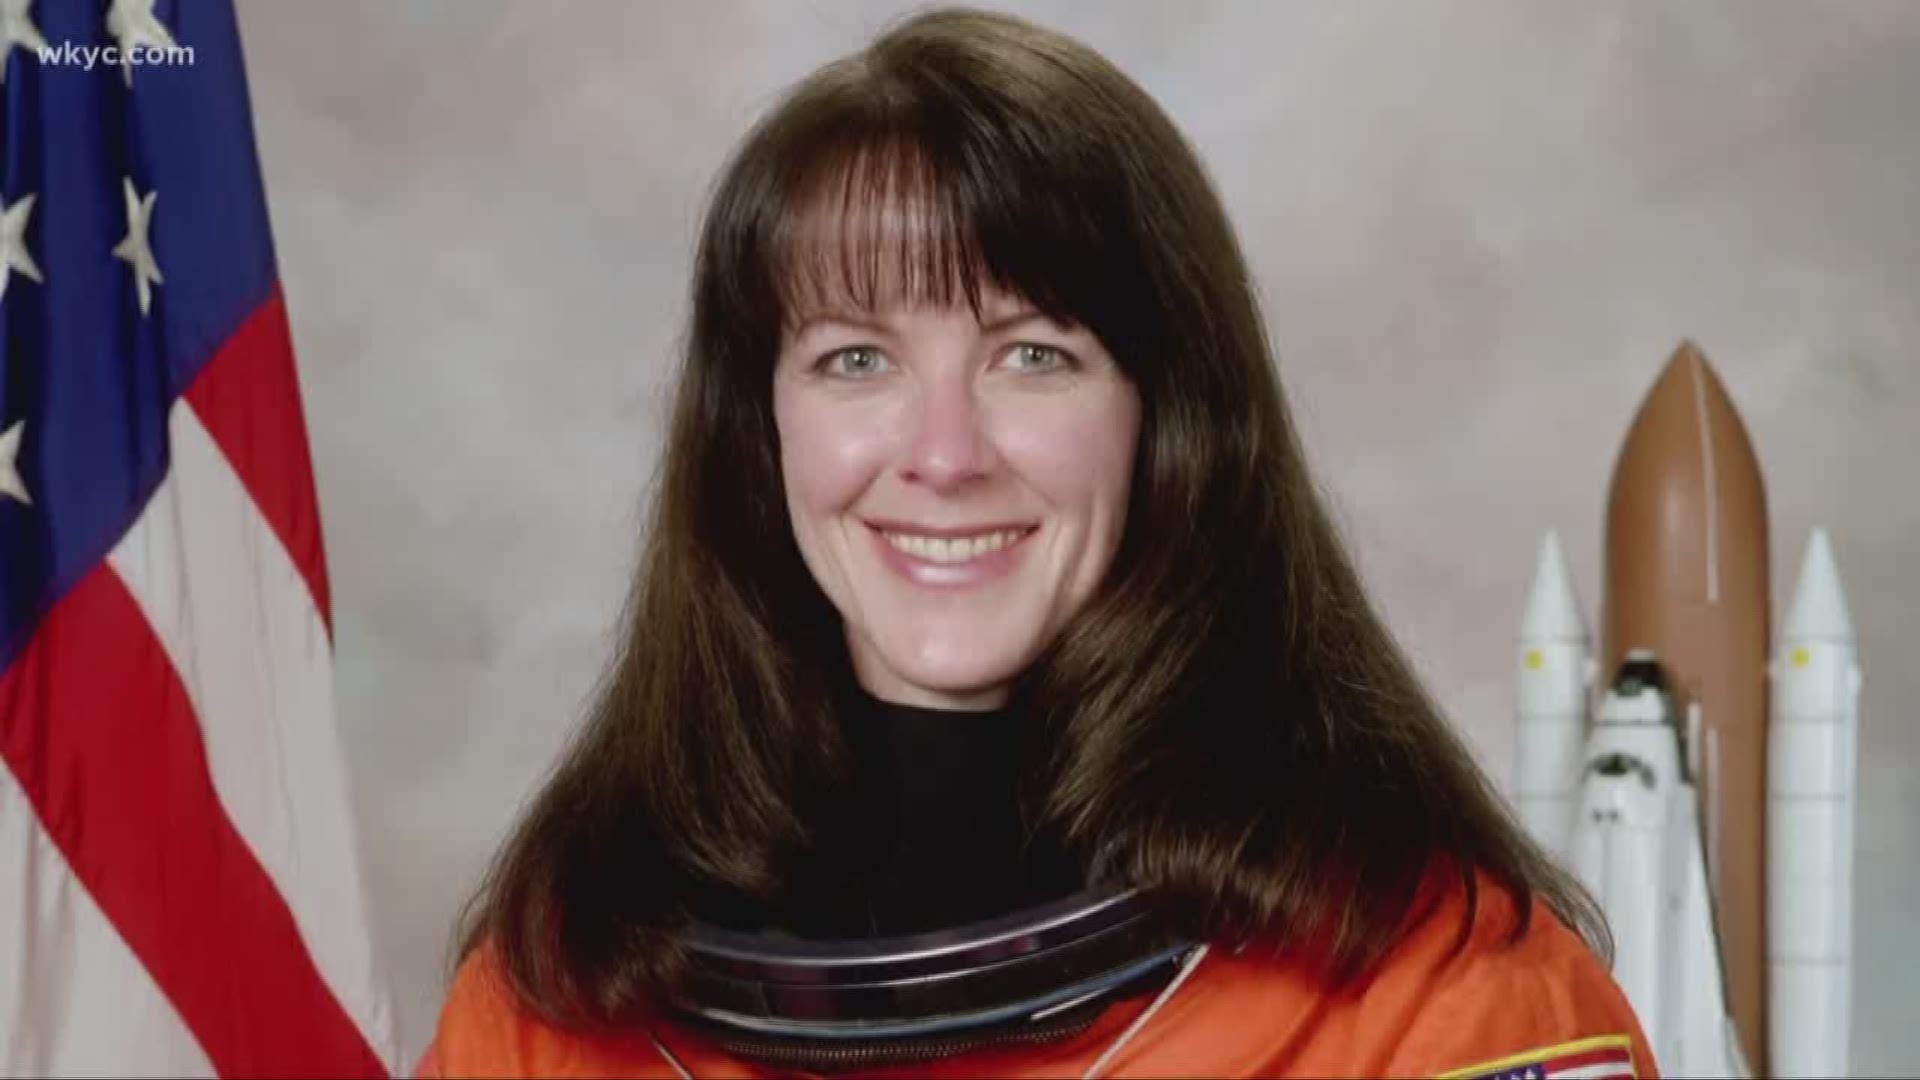 Astronaut and director of the John Glenn Research Center, Janet Kavandi is retiring. She's worked for NASA for 25 years. She flew the Space Shuttle three times and spent more than 33 days in space.